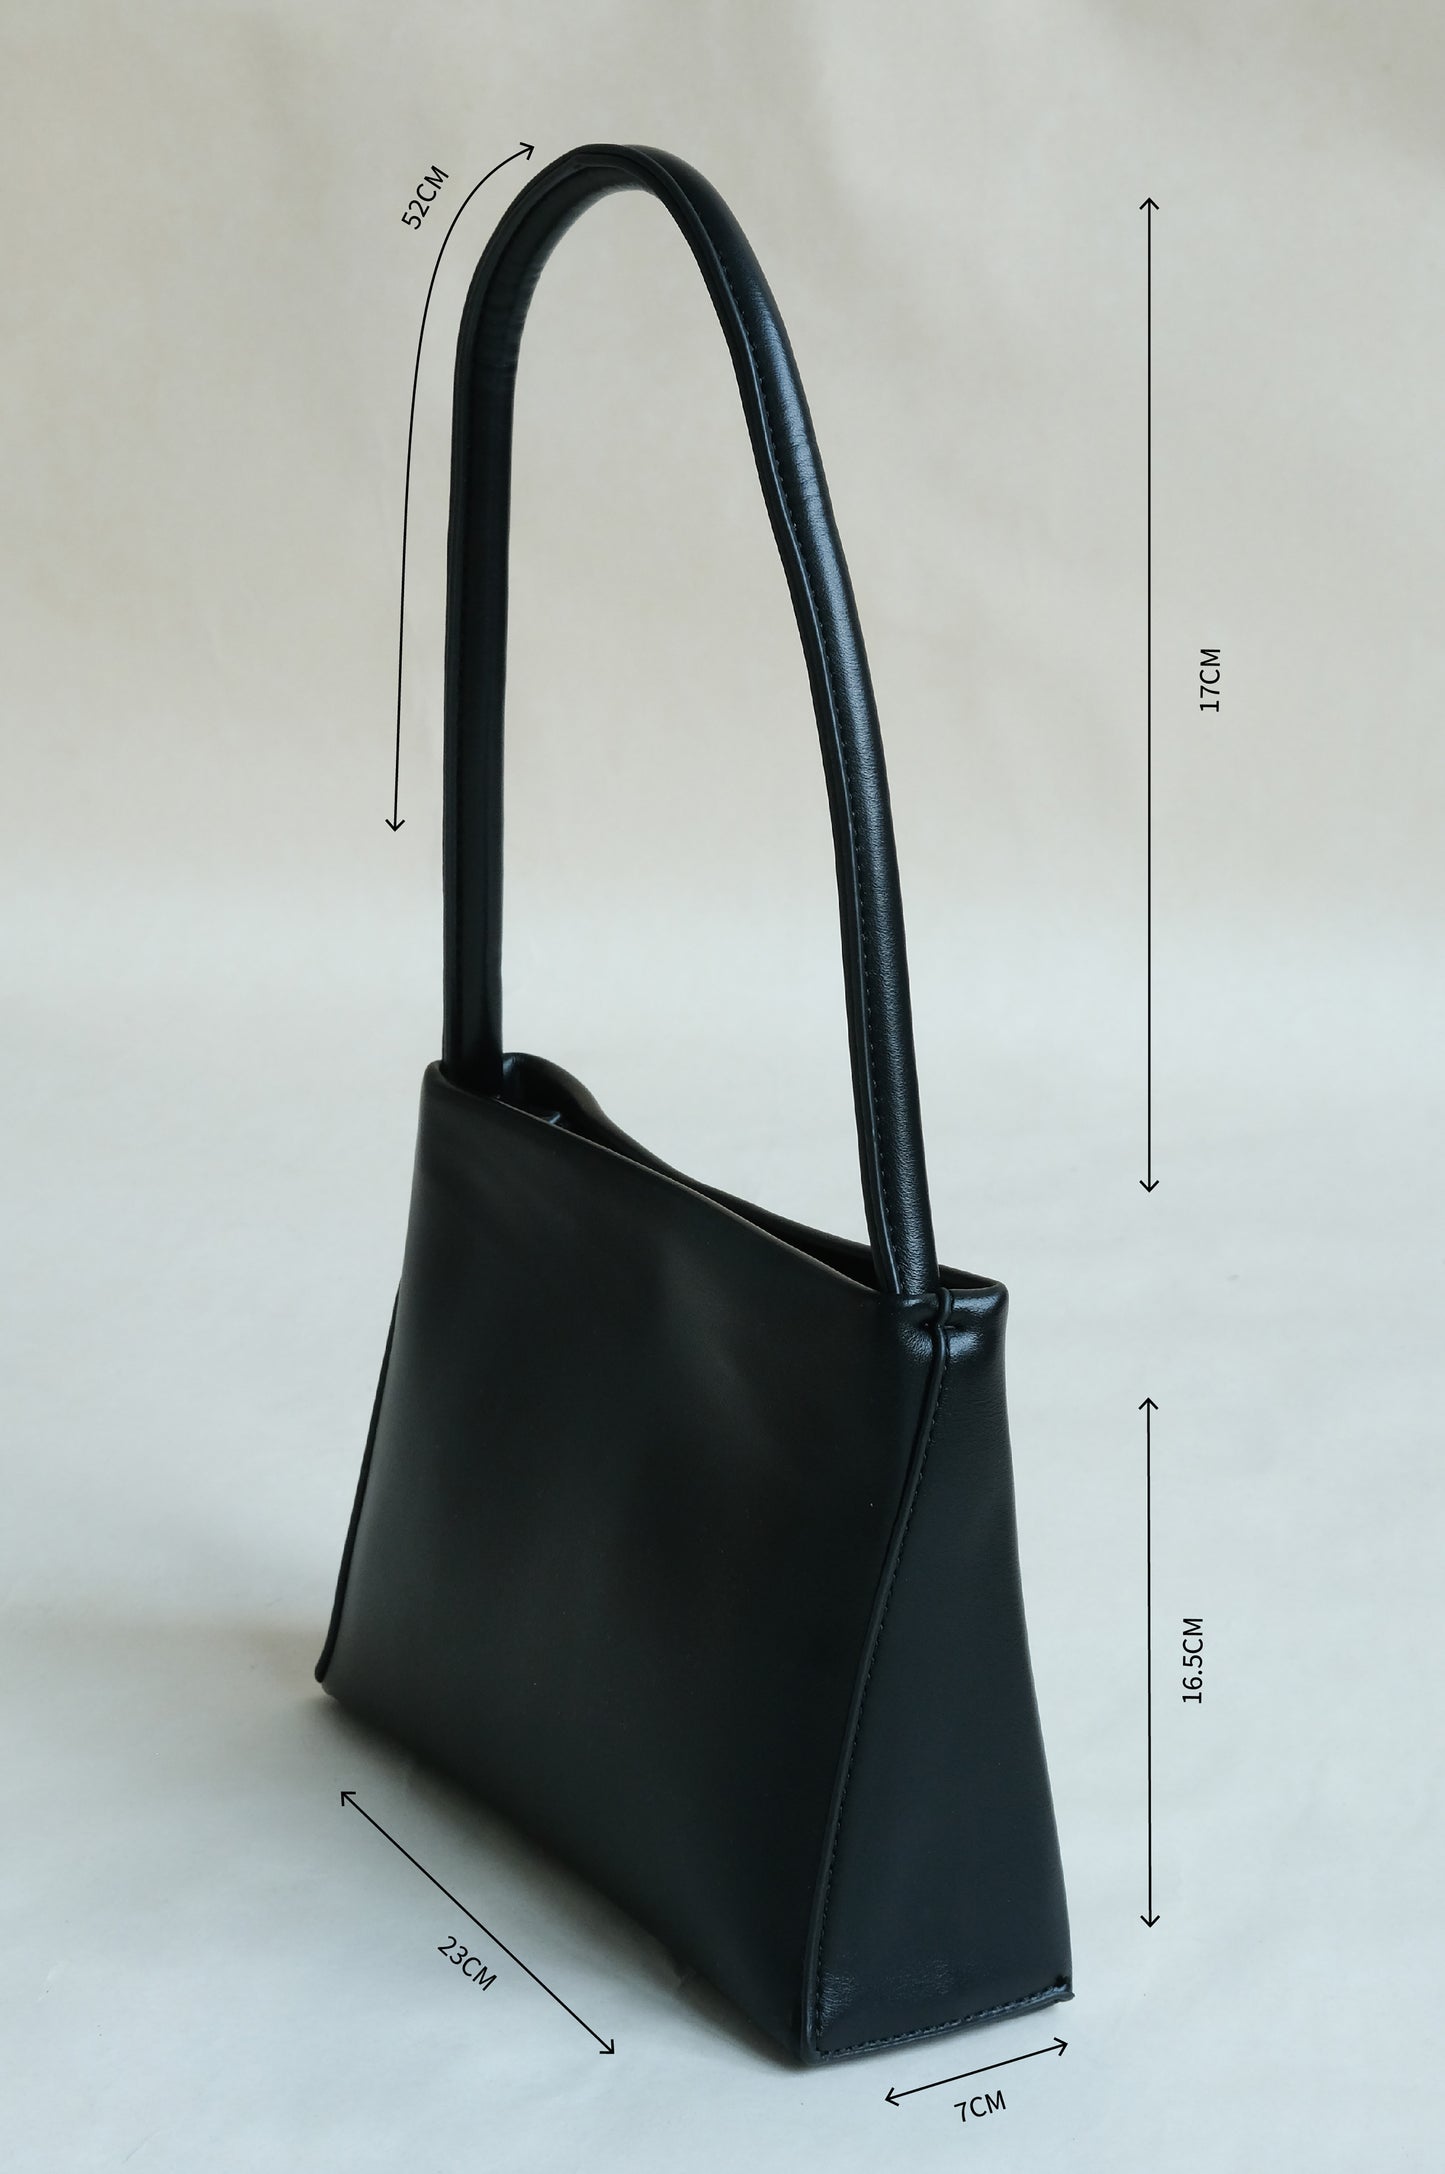 Square tote bag with one shoulder under the armpits in classic black